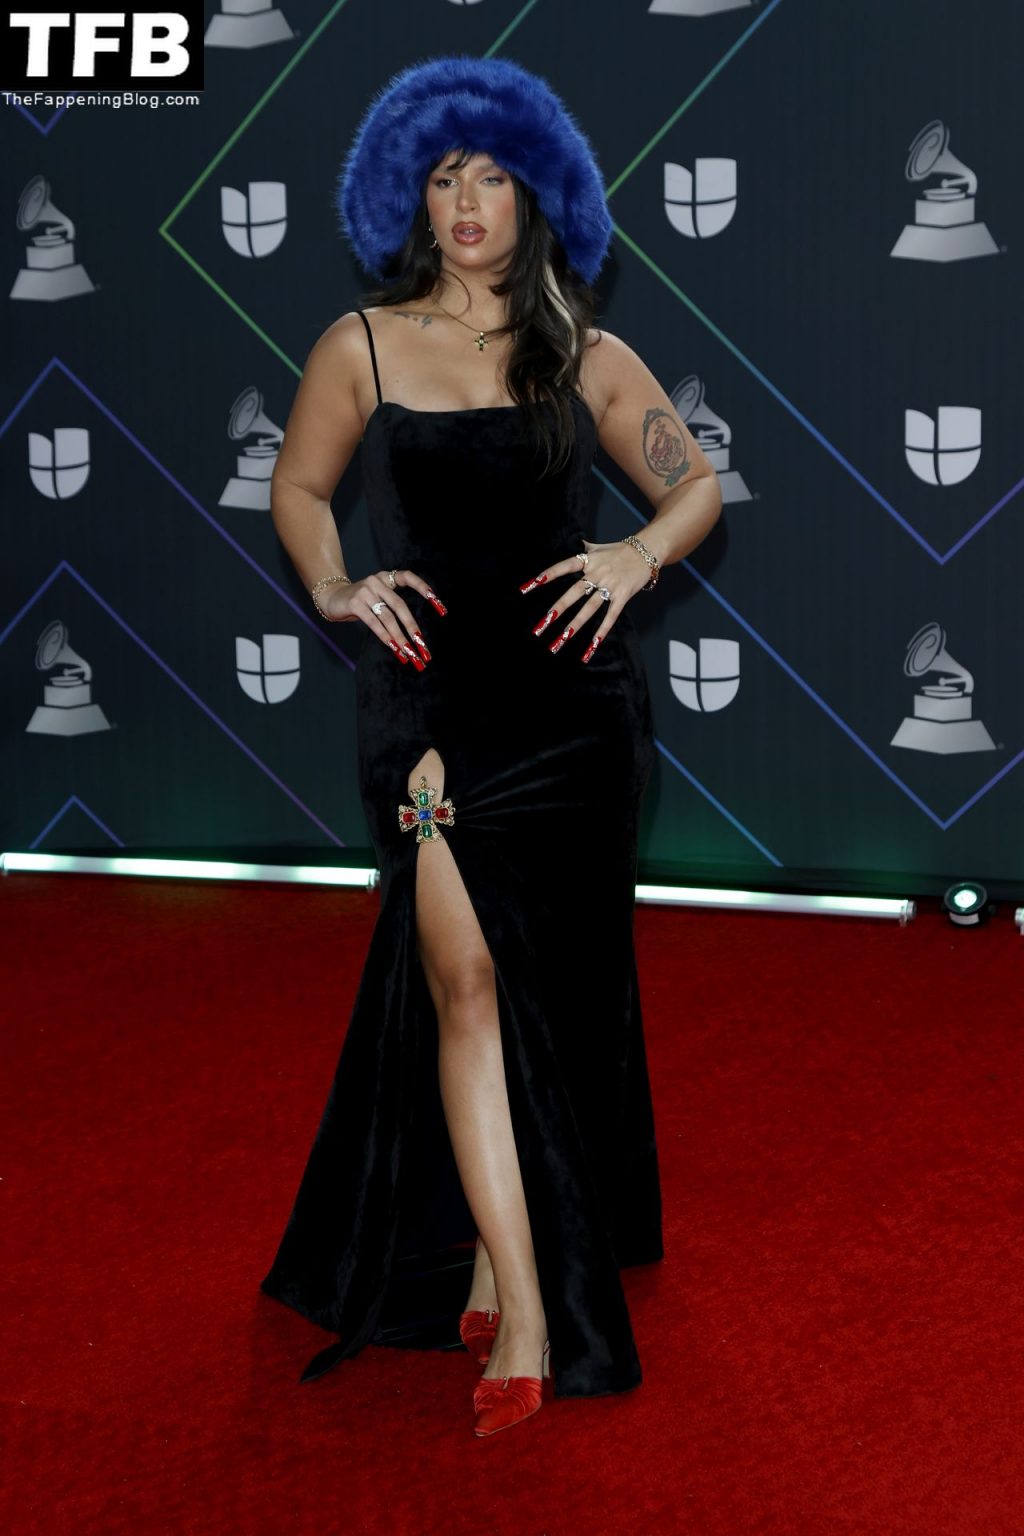 Nathy Peluso Shows Her Cleavage at the 22nd Annual Latin Grammy Awards (2 Photos)